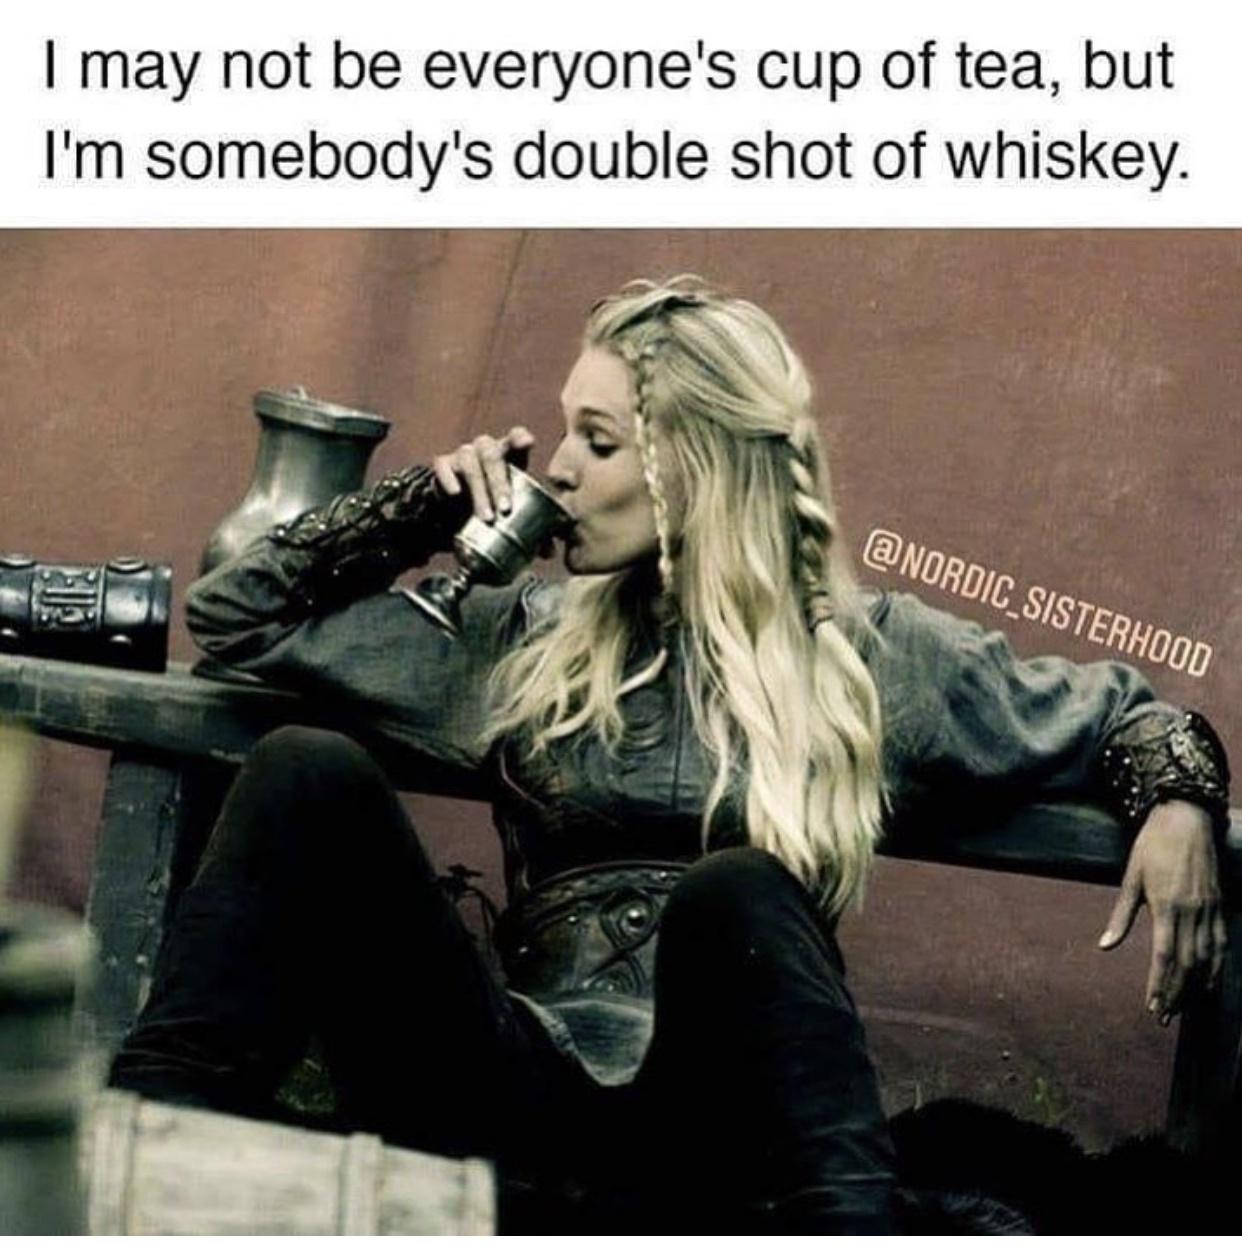 dank memes - funny memes - photo caption - I may not be everyone's cup of tea, but I'm somebody's double shot of whiskey. Sisterhood